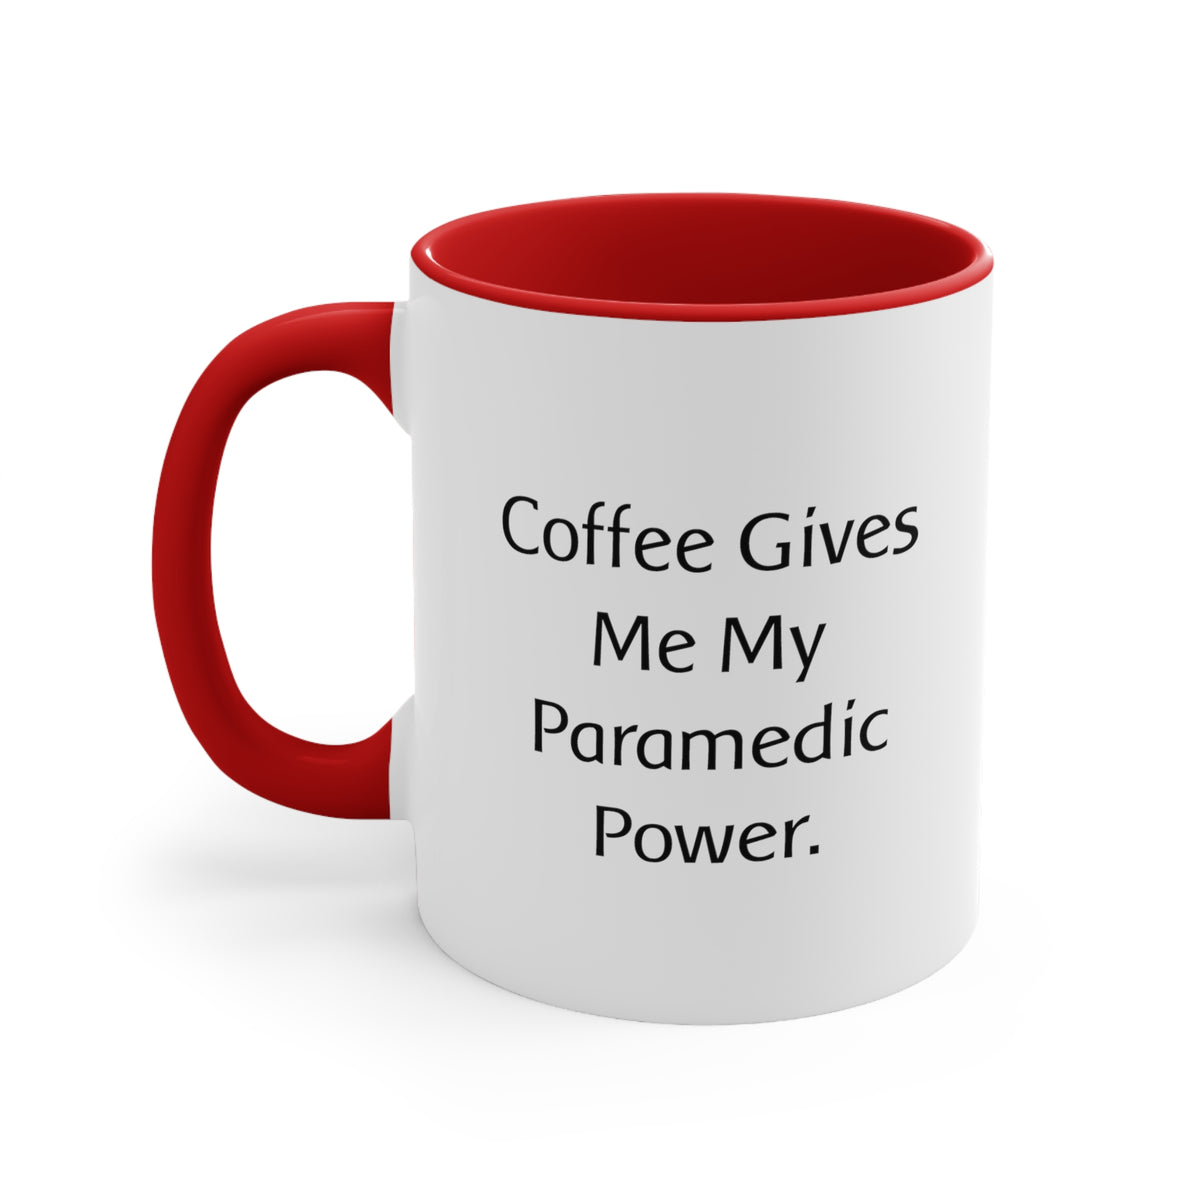 Gag Paramedic Gifts, Coffee Gives Me My Paramedic Power, Motivational Holiday Two Tone 11oz Mug From Coworkers